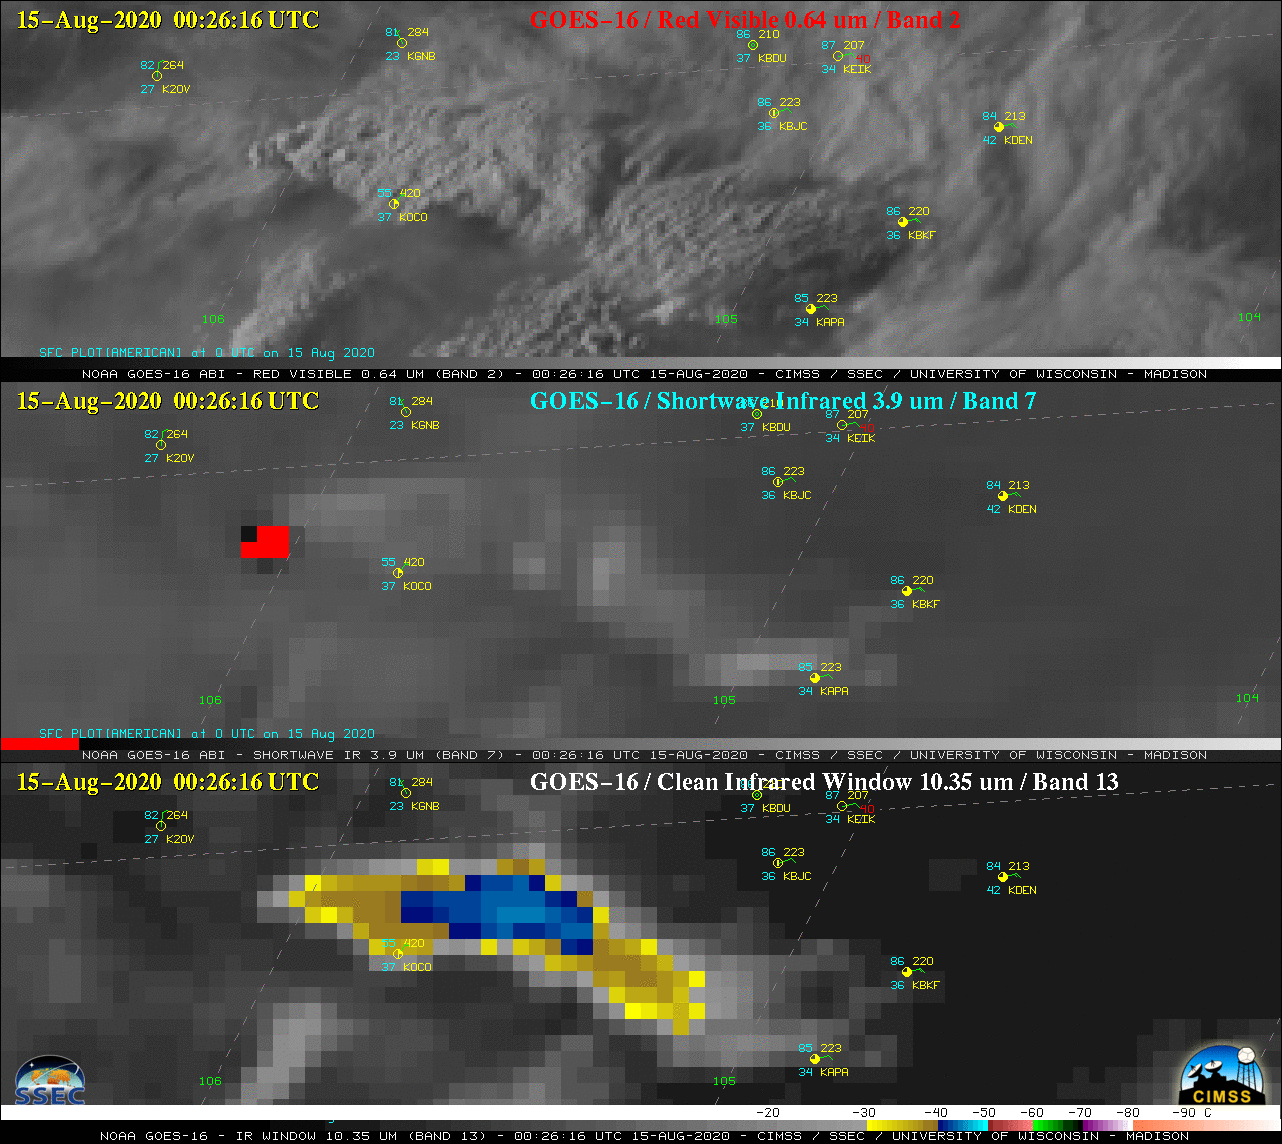 GOES-16 “Red” Visible (0.64 µm, top), Shortwave Infrared (3.9 µm, center) and “Clean” Infrared Window (10.35 µm, bottom) images, with hourly plots of surface reports [click to play animation | MP4]